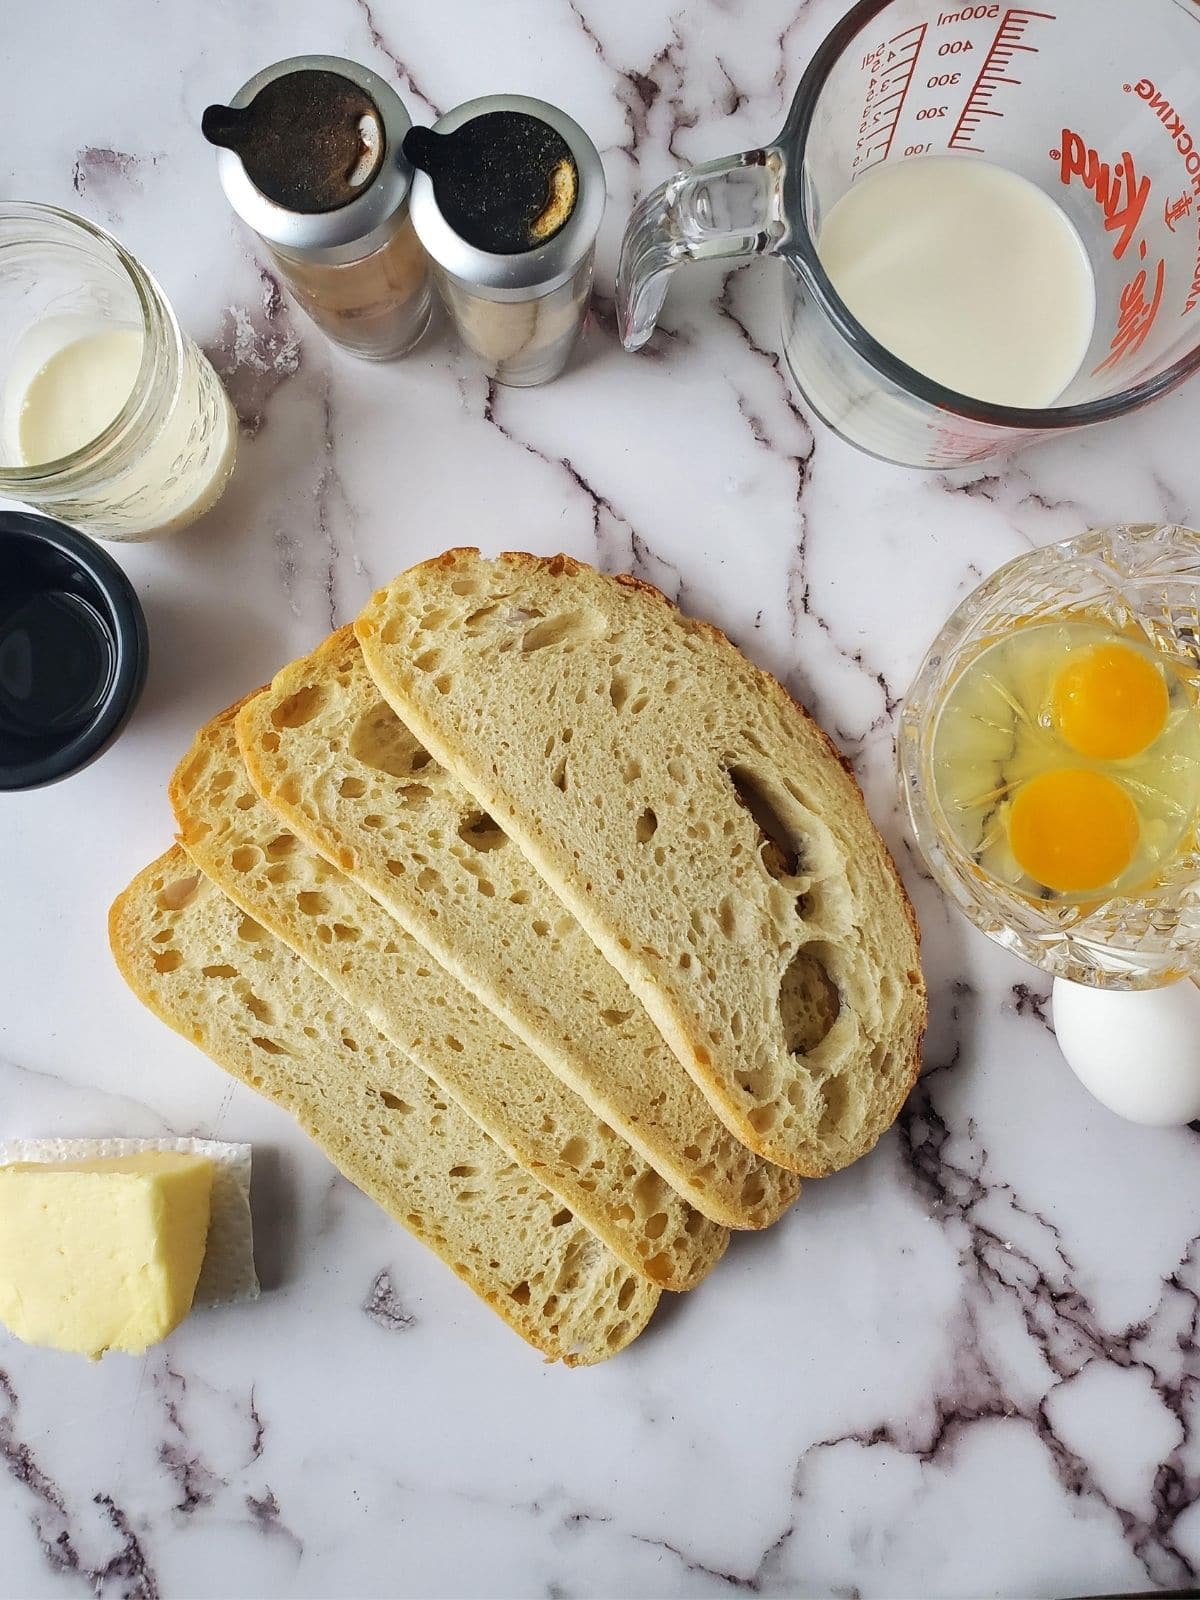 There are 4 slices of sourdough bread in the center of the photo. Around them are glasses dishes of cinnamon, nutmeg, milk, heavy cream, vanilla, and eggs. There is also a little stick of butter.